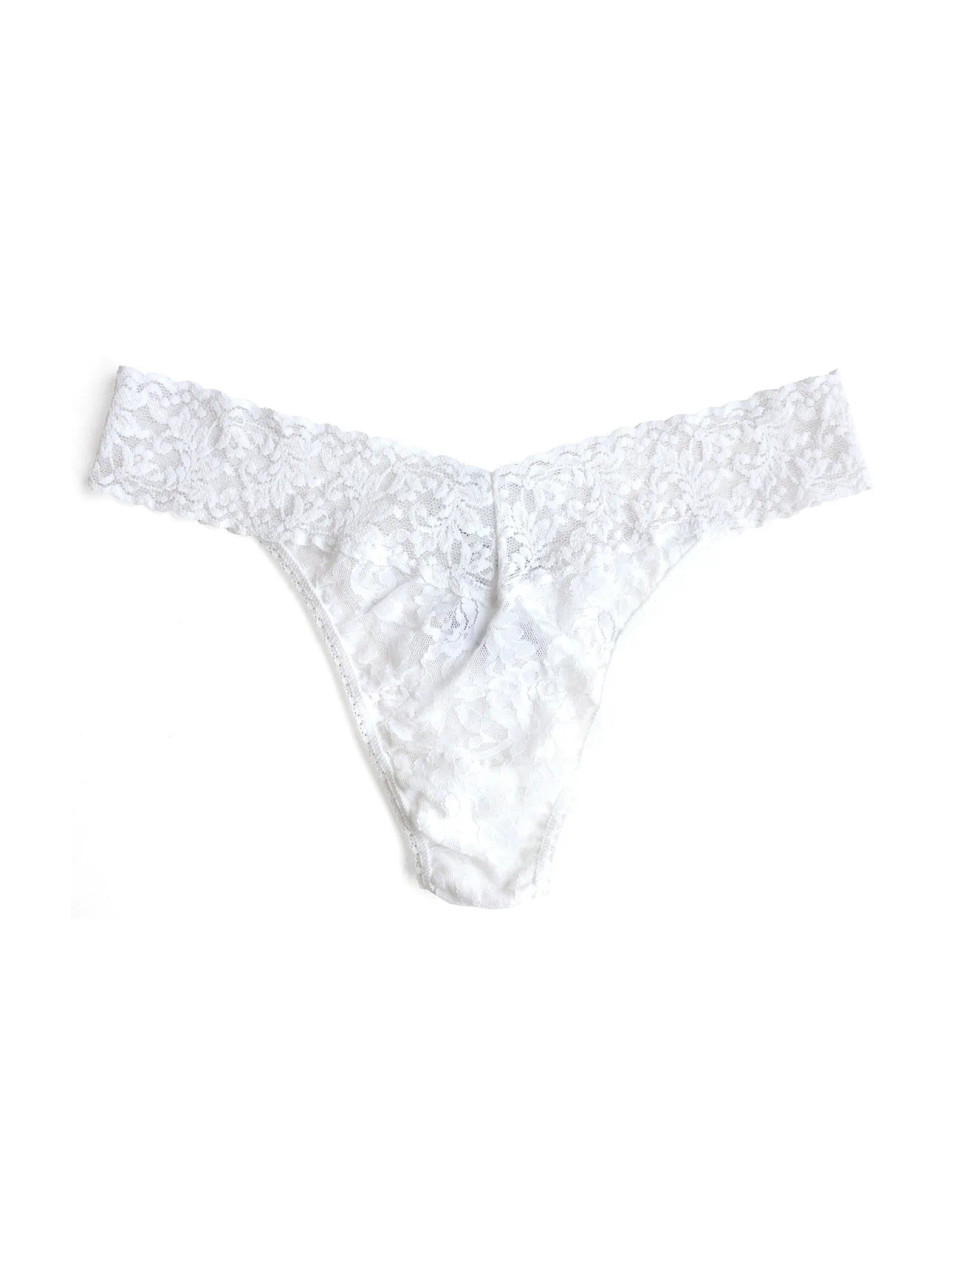 Hanky Panky Signature Lace Original Rise Thong, Rolled - Monkee's of Draper